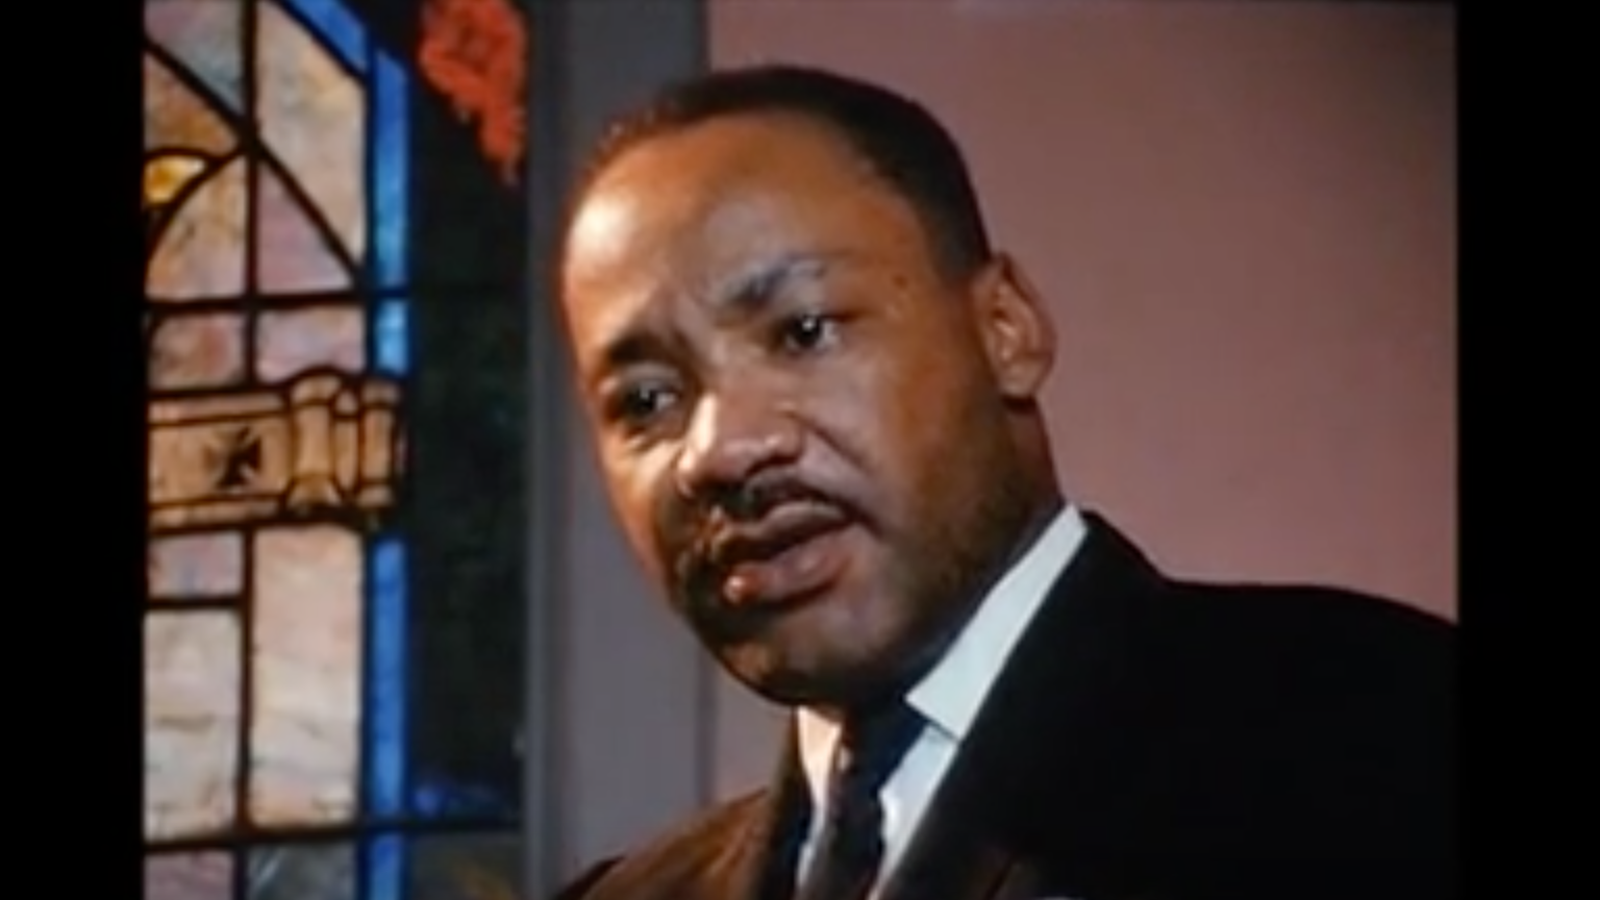 Martin Luther King Jr.: 'My Dream Has Turned Into a Nightmare'